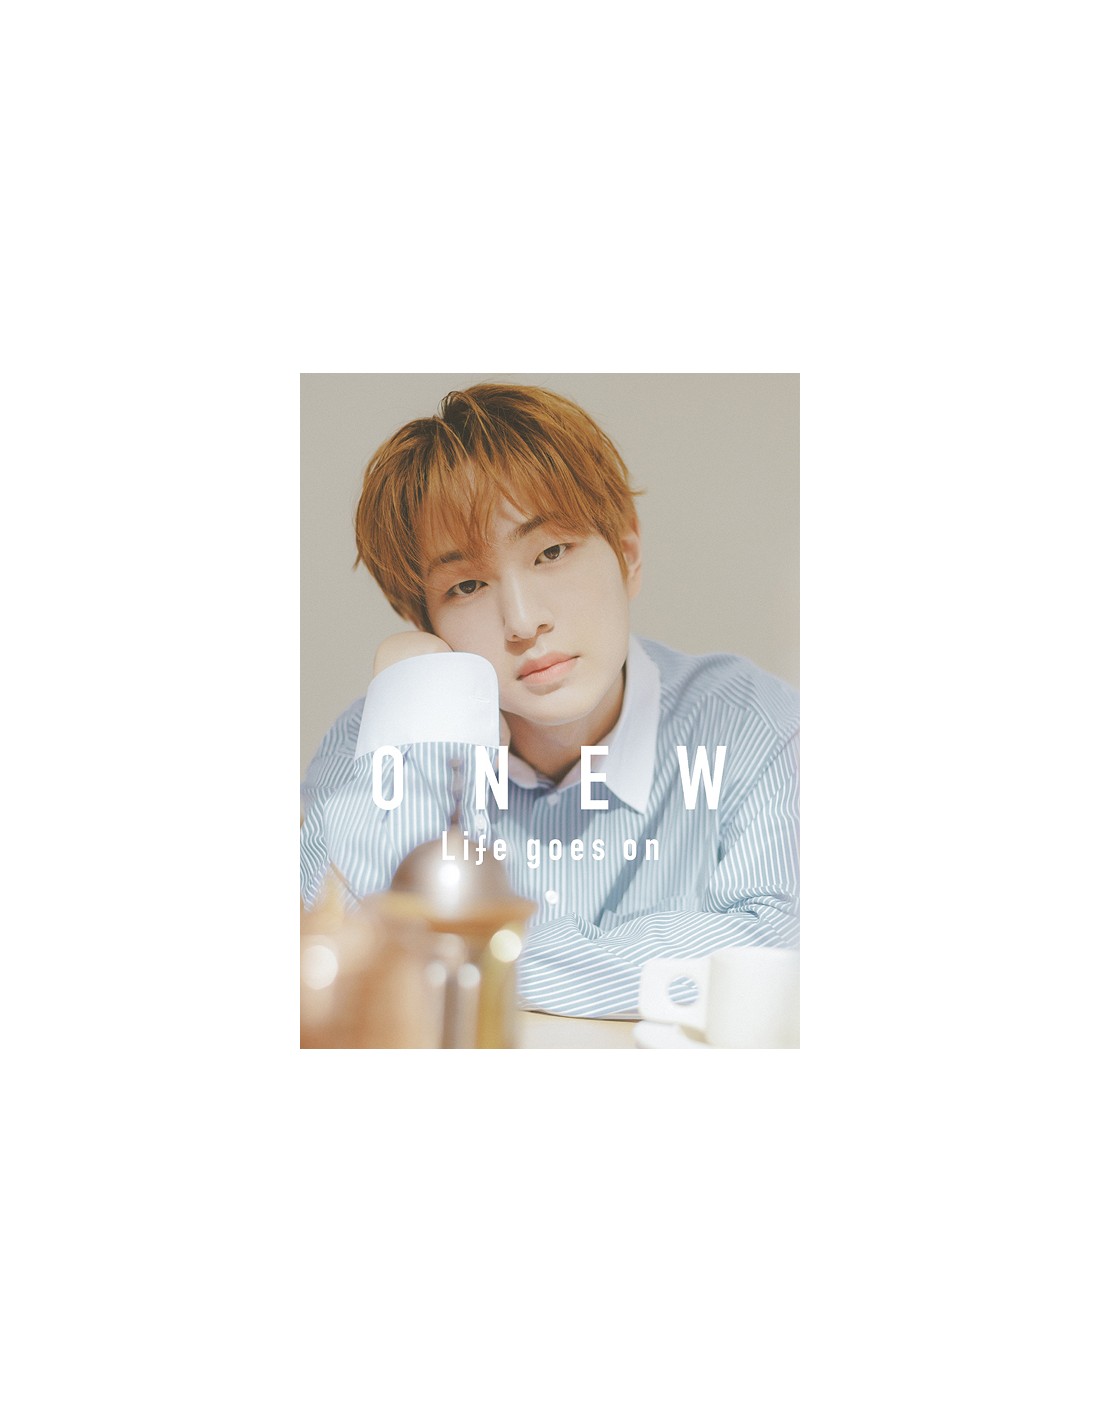 [Japanese Edition] ONEW - Life goes on (1st Limited Edition Ver.A) 2CD +  Blu-ray